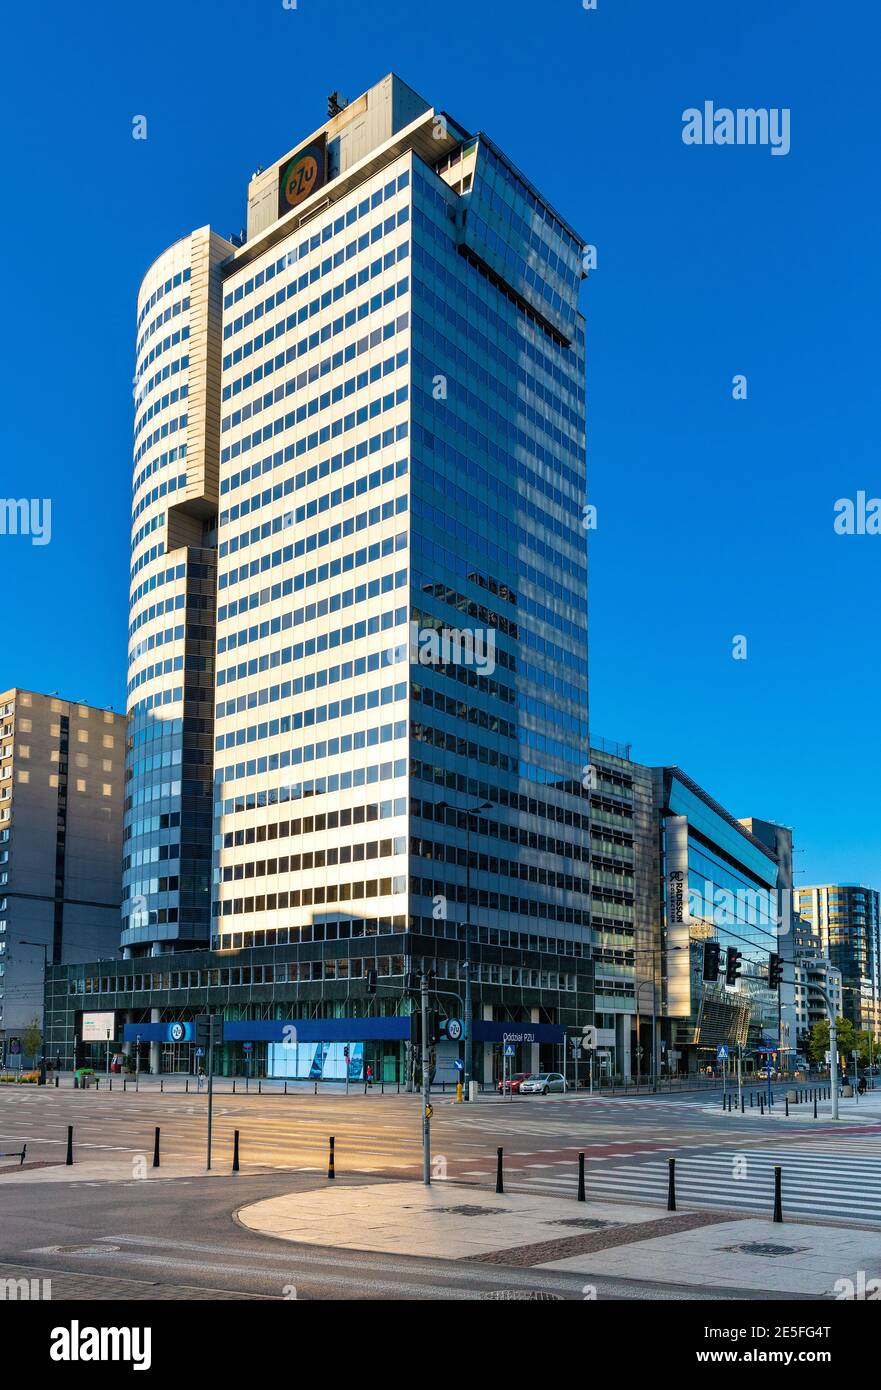 Warsaw, Poland - May 22, 2020: PZU Tower office skyscraper at Jana Pawla II and Grzybowska junction in Srodmiescie business district of Warsaw Stock Photo